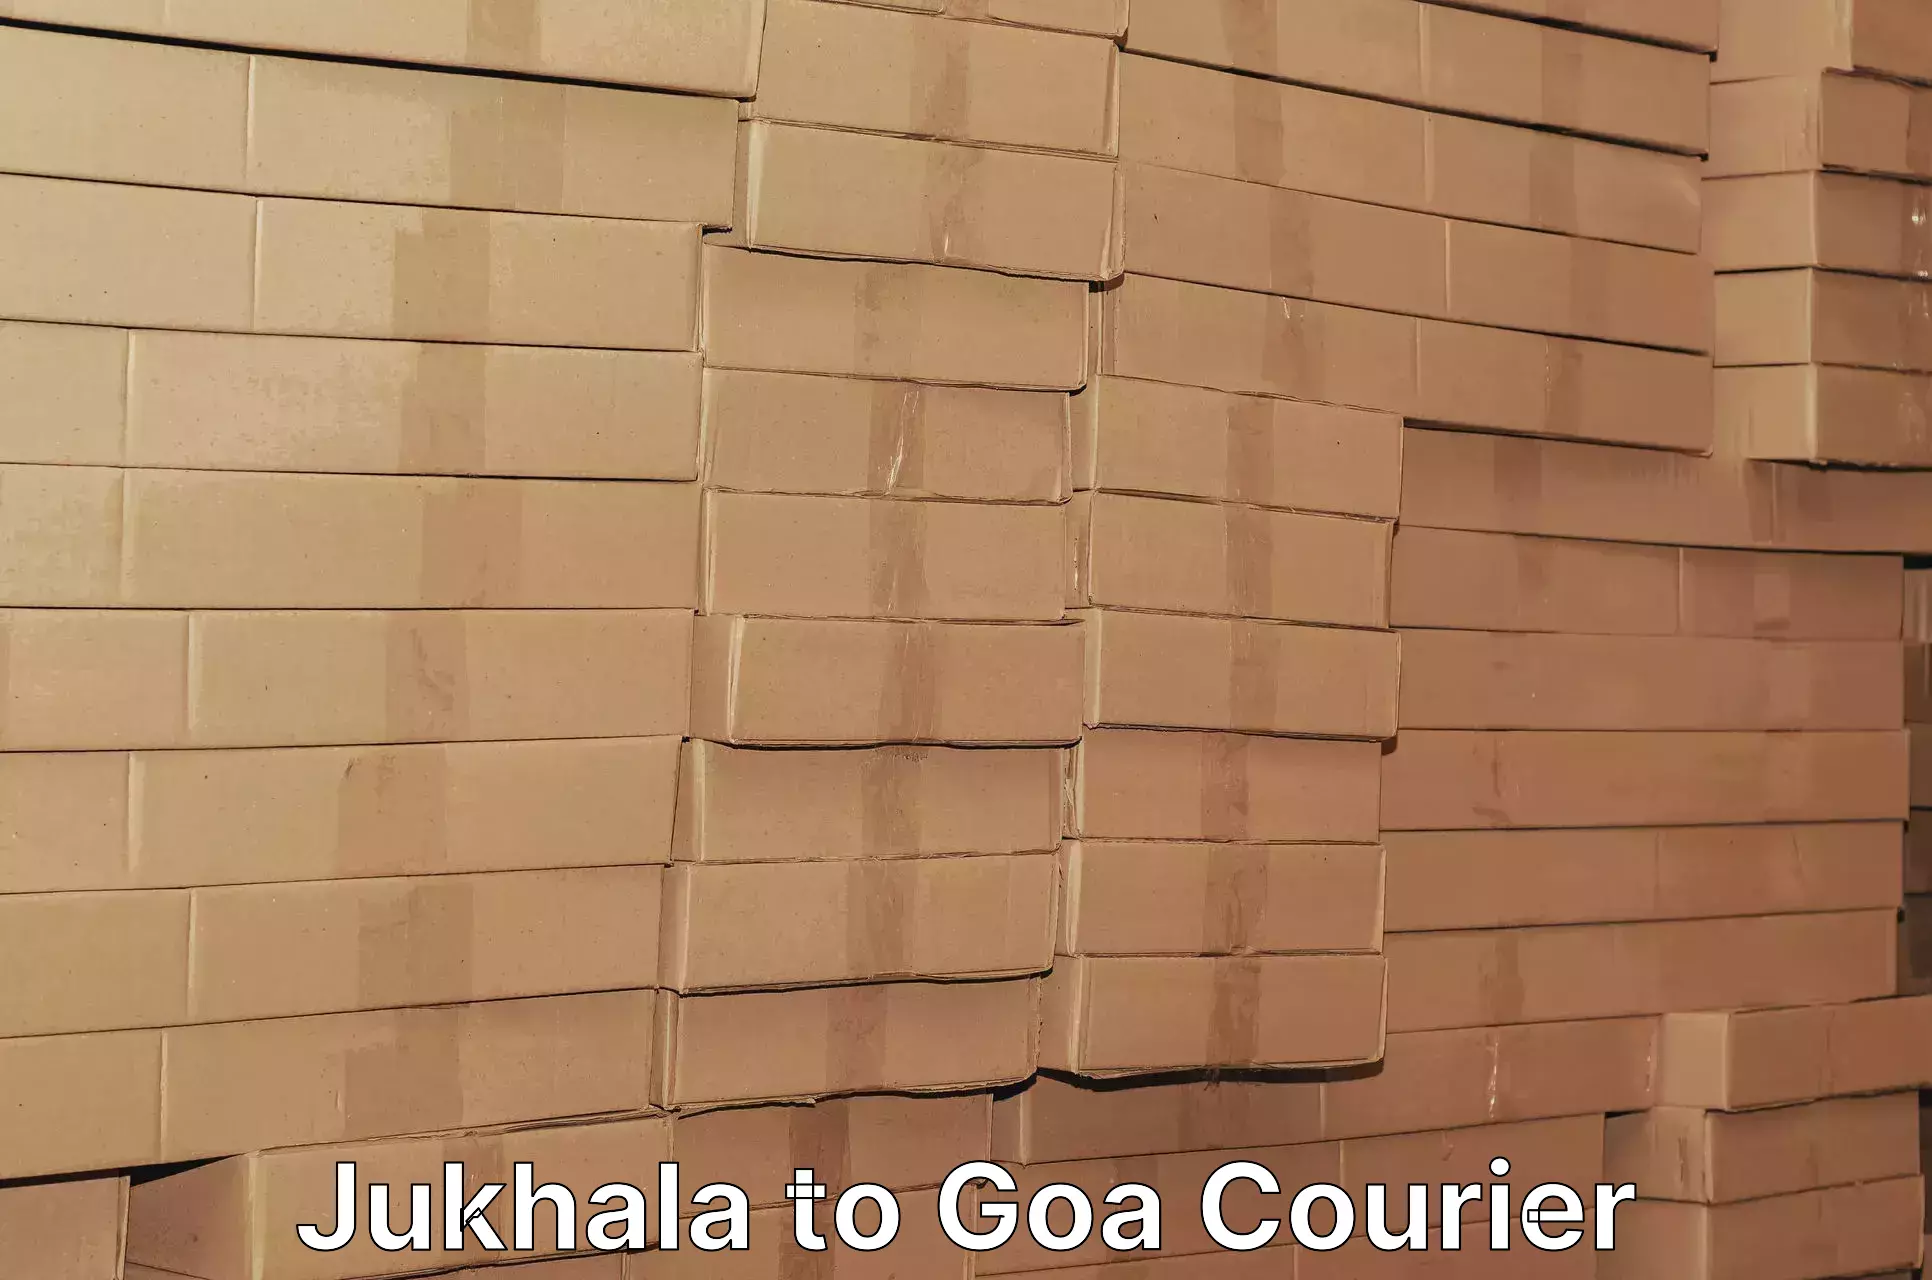 Express delivery capabilities Jukhala to Goa